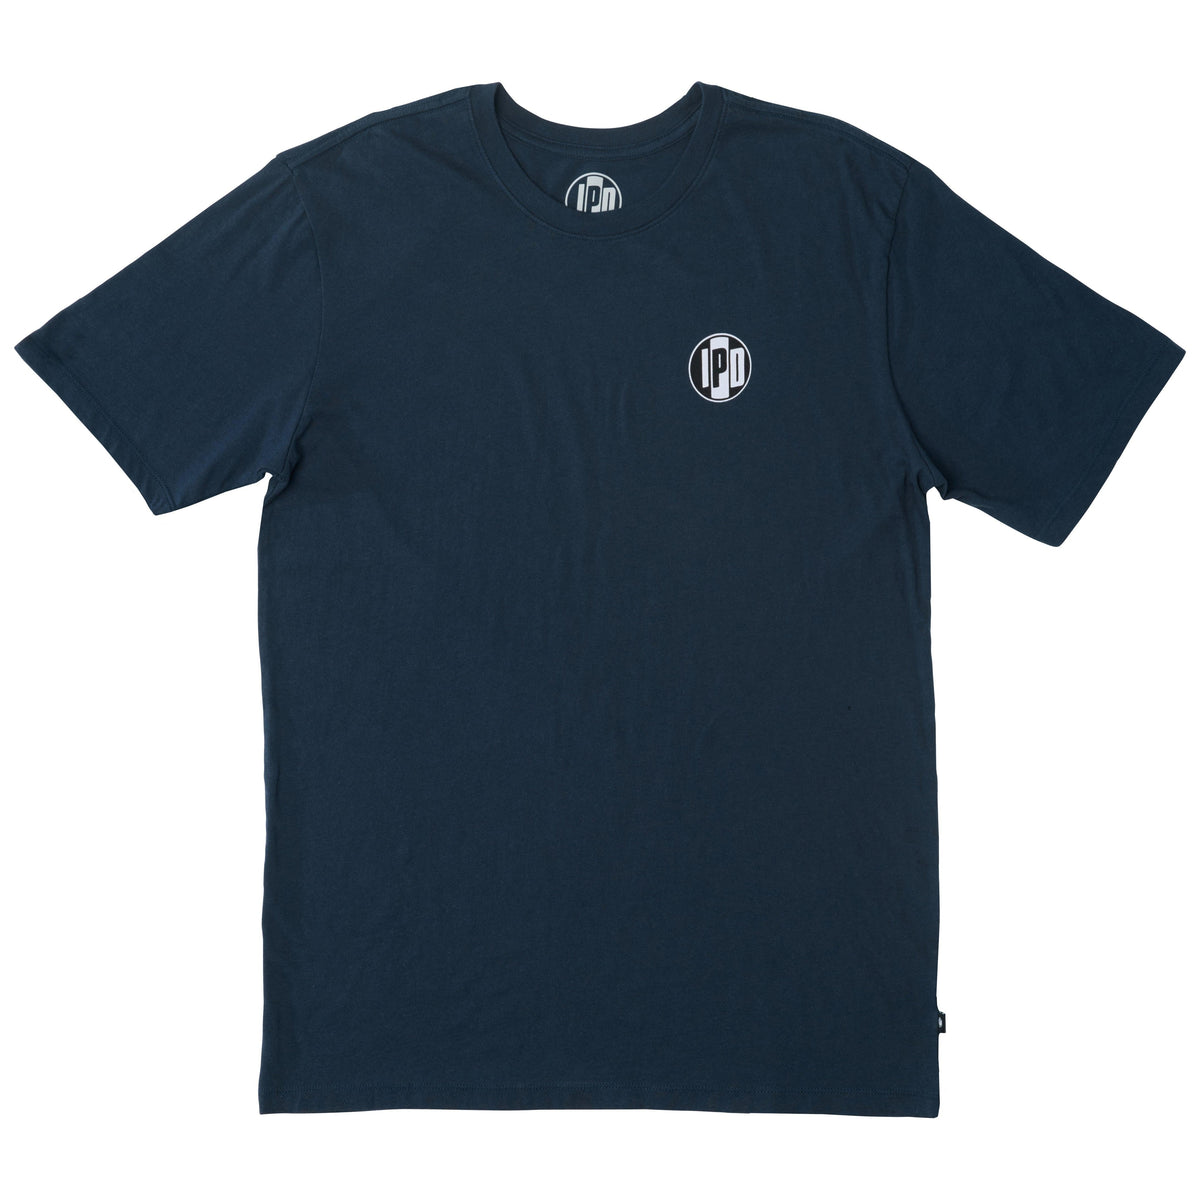 The Surf Shop Super Soft Tee has a left chest front graphic of the IPD logo in black and light blue. The back pictures a hand-drawn depiction of a surf shop across the upper middle back of the shirt. The body color of the shirt is navy and the graphic color is multicolored and has a small black side seam label with the IPD logo.